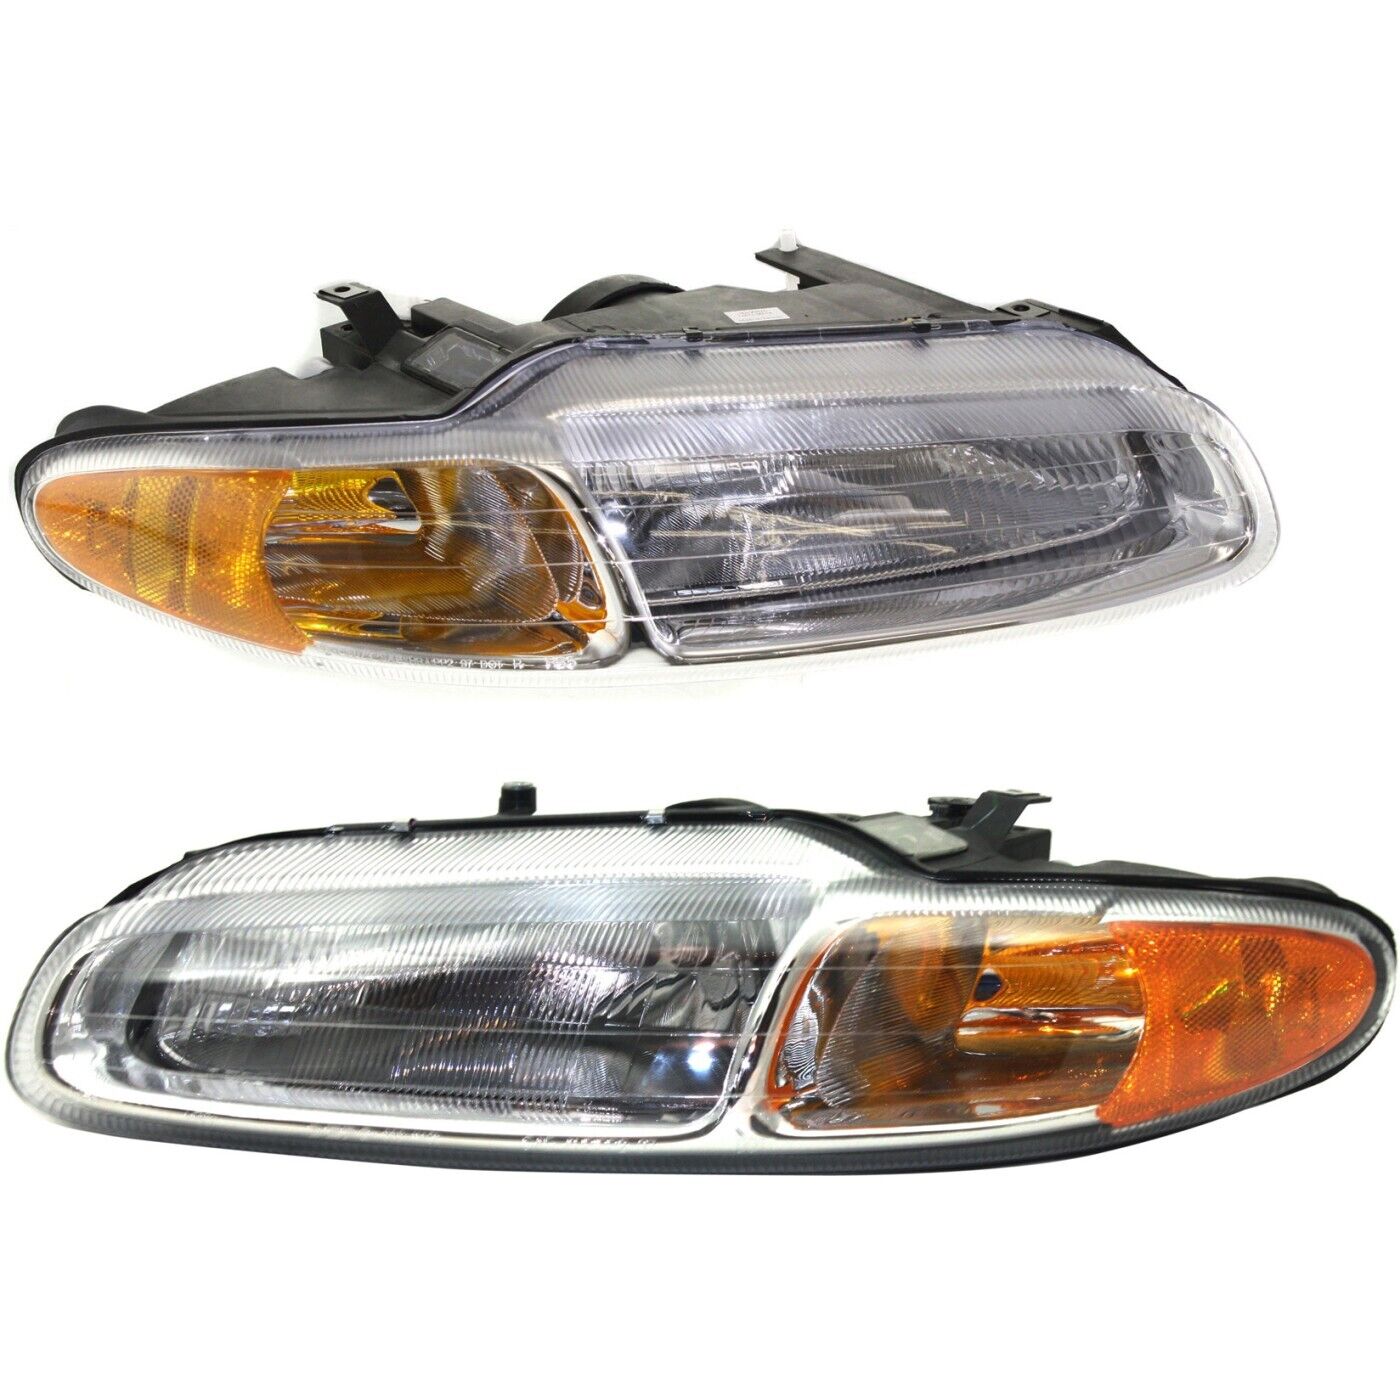 Headlight Set For 96-2000 Chrysler Sebring Convertible Left and Right With Bulb